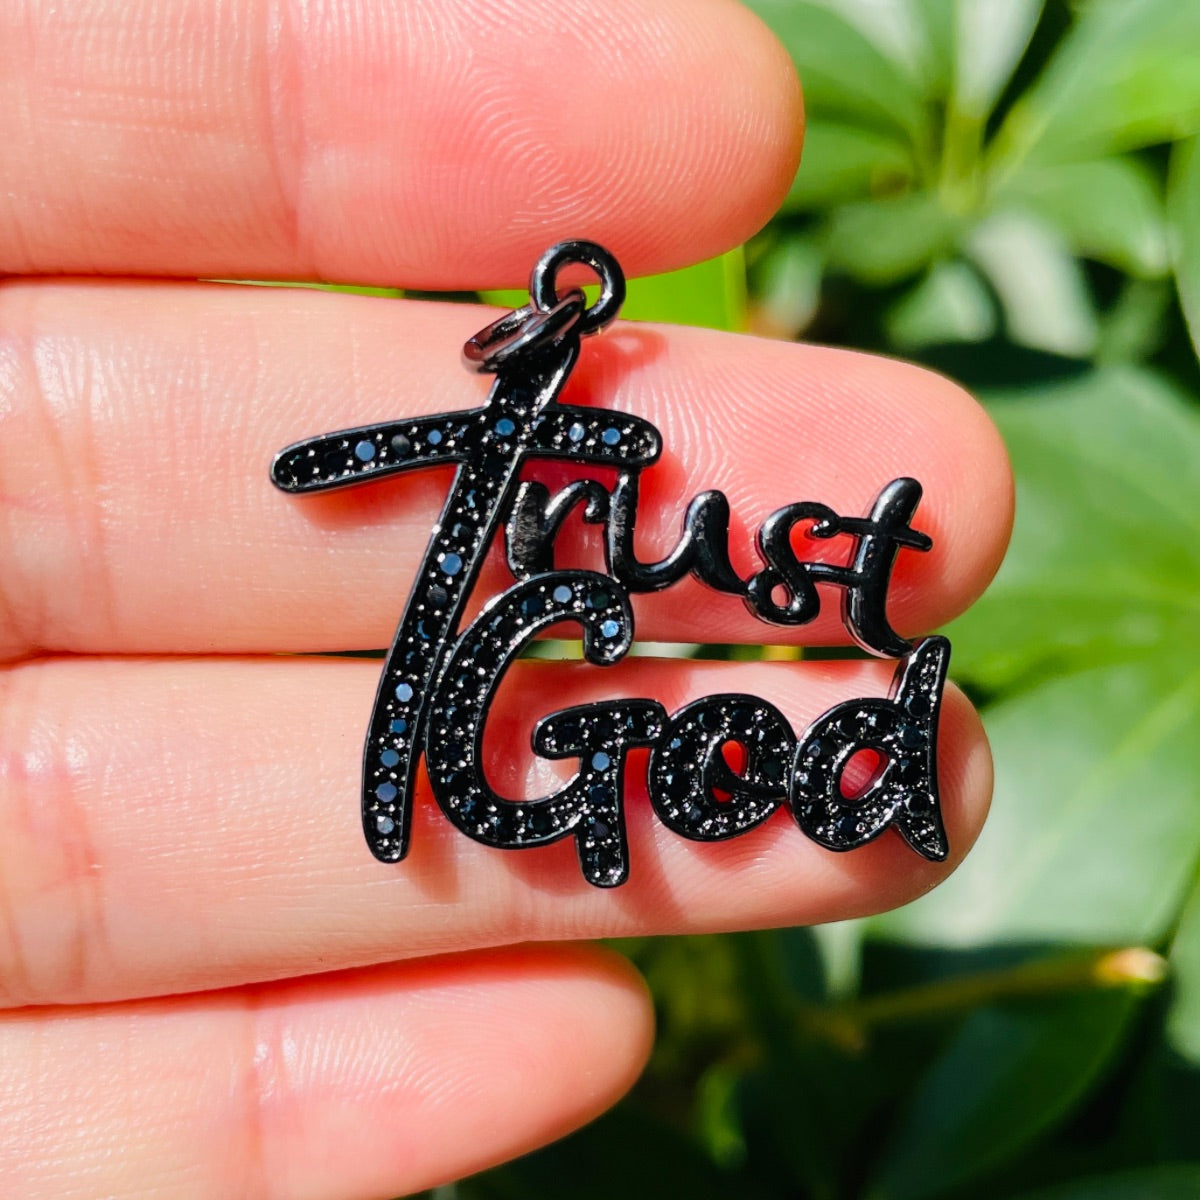 10pcs/lot 32*28mm CZ Pave Trust God Word Charms Black on Black CZ Paved Charms Christian Quotes New Charms Arrivals Charms Beads Beyond